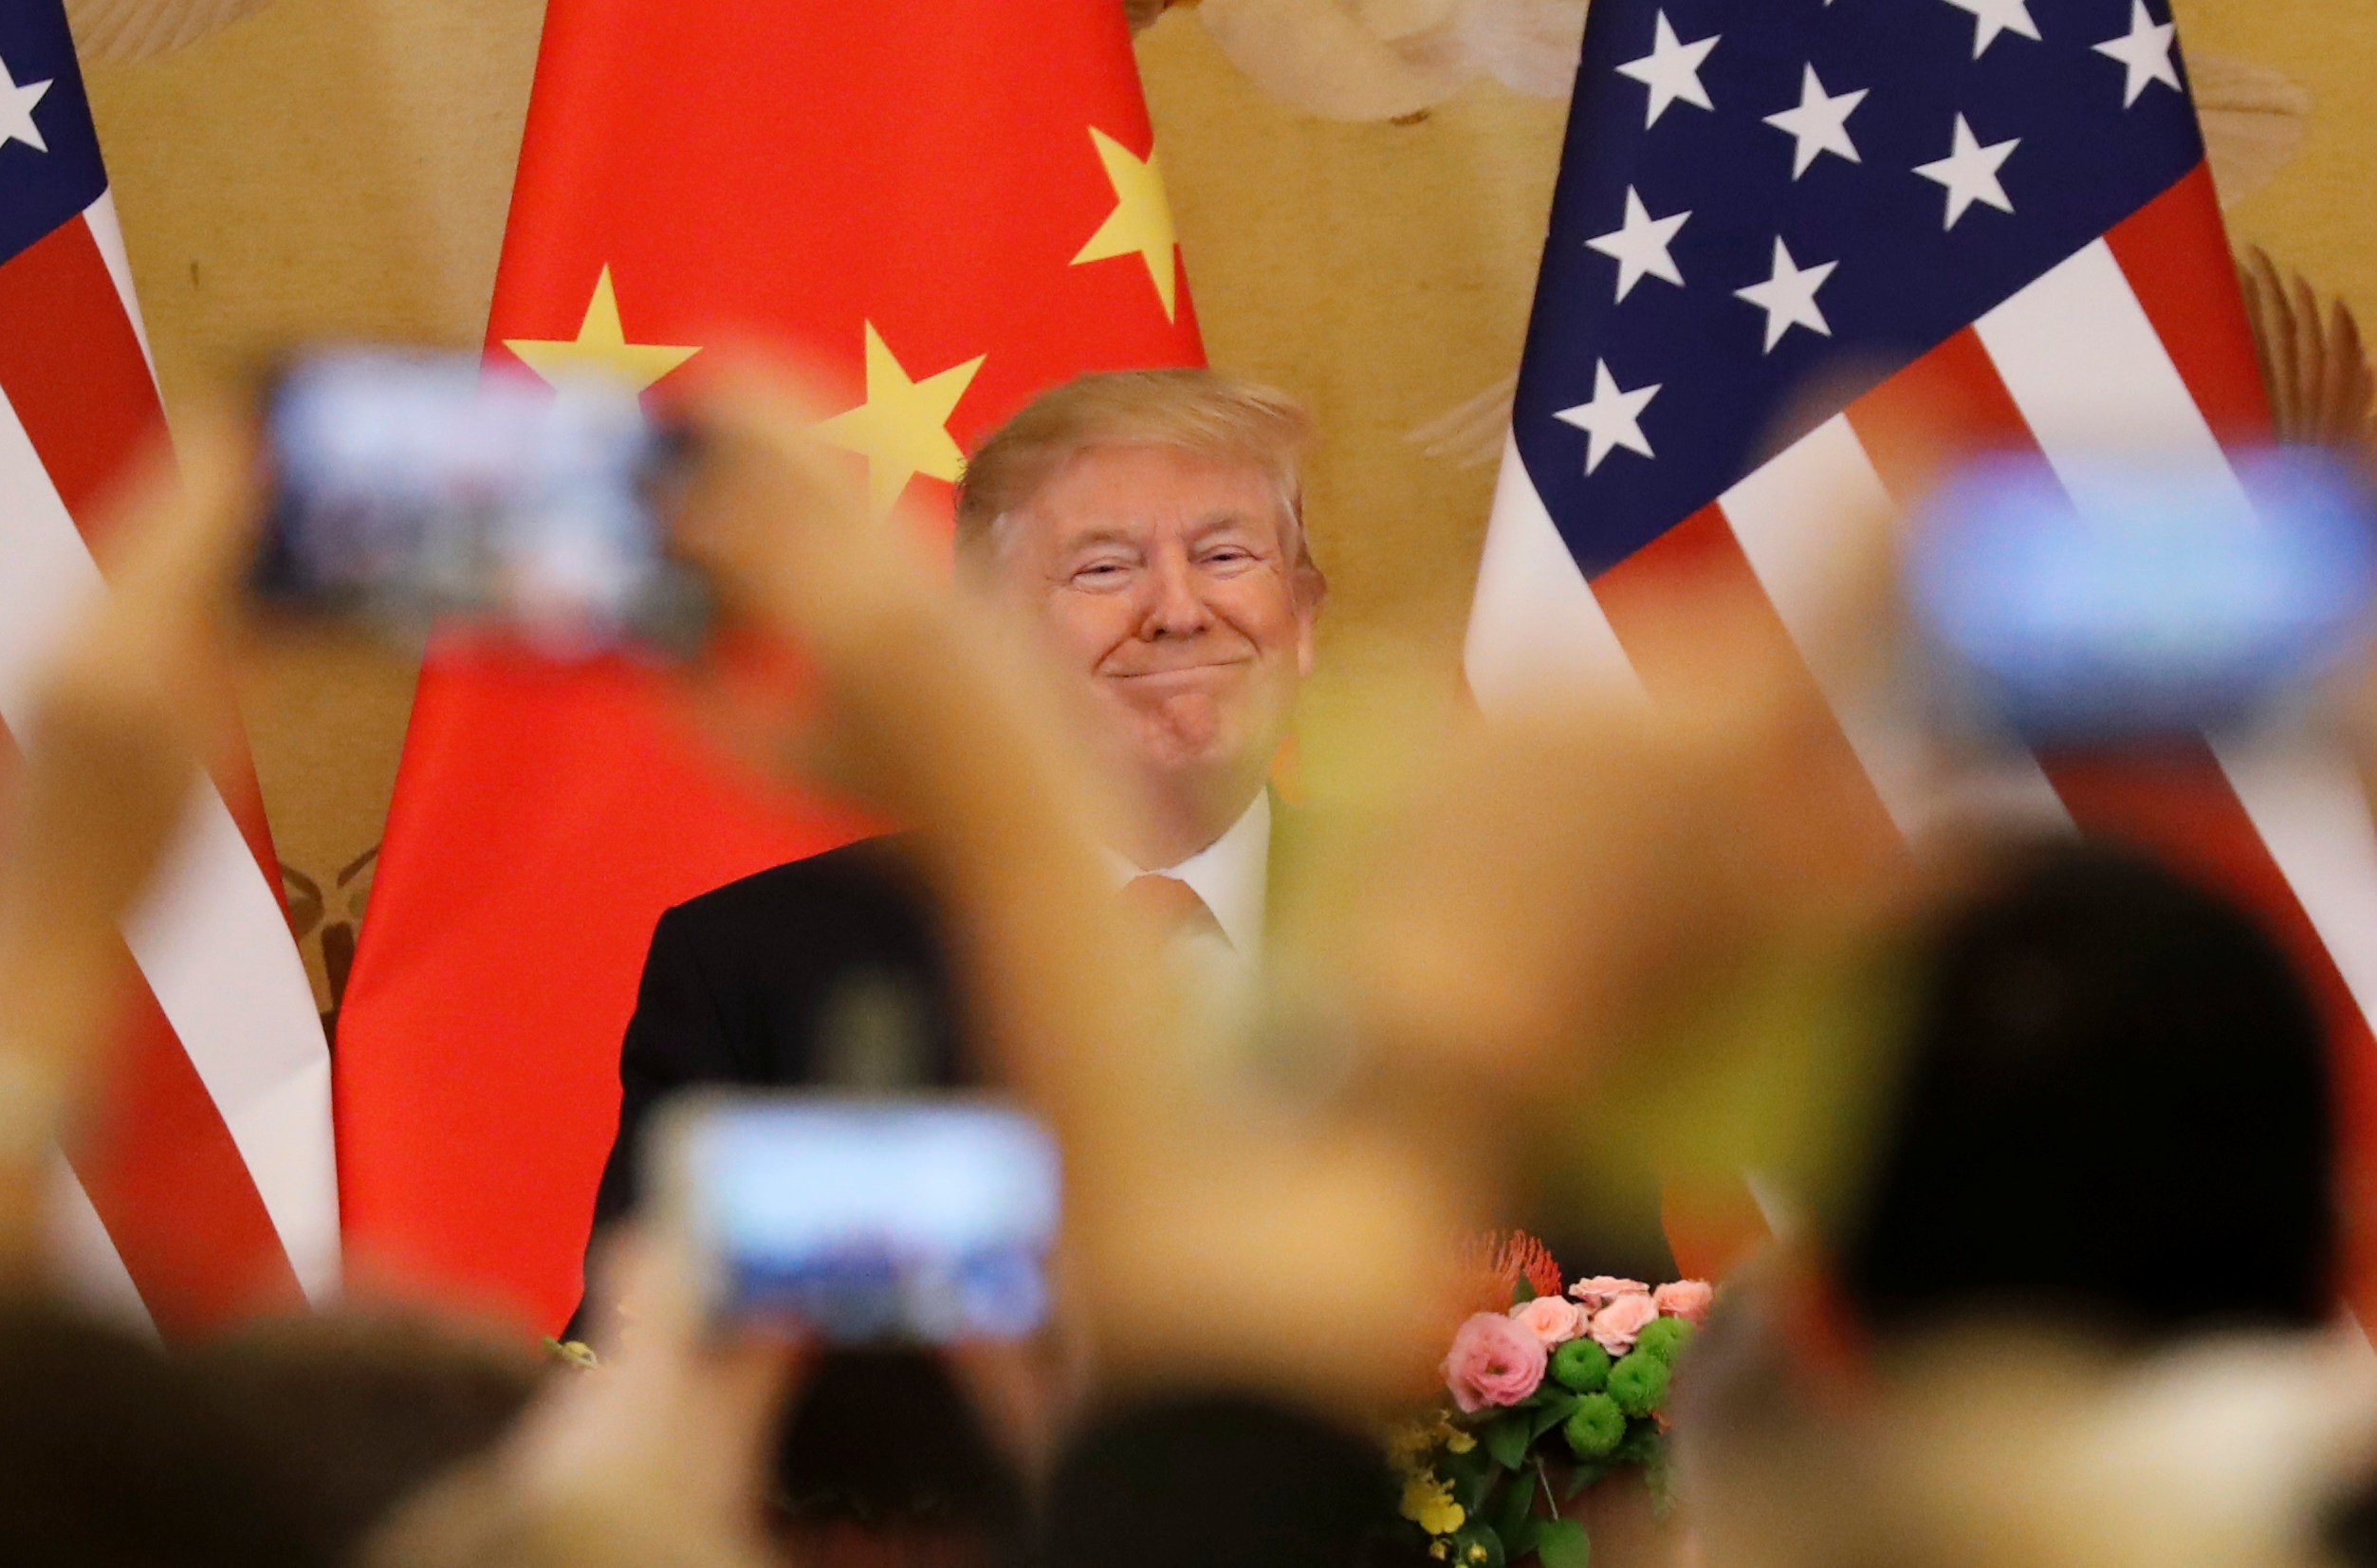 President Xi Jinping caught on early that lavishing the US president with pomp and praise could easily tame the harsh, anti-Asia rhetoric he put on display before his election